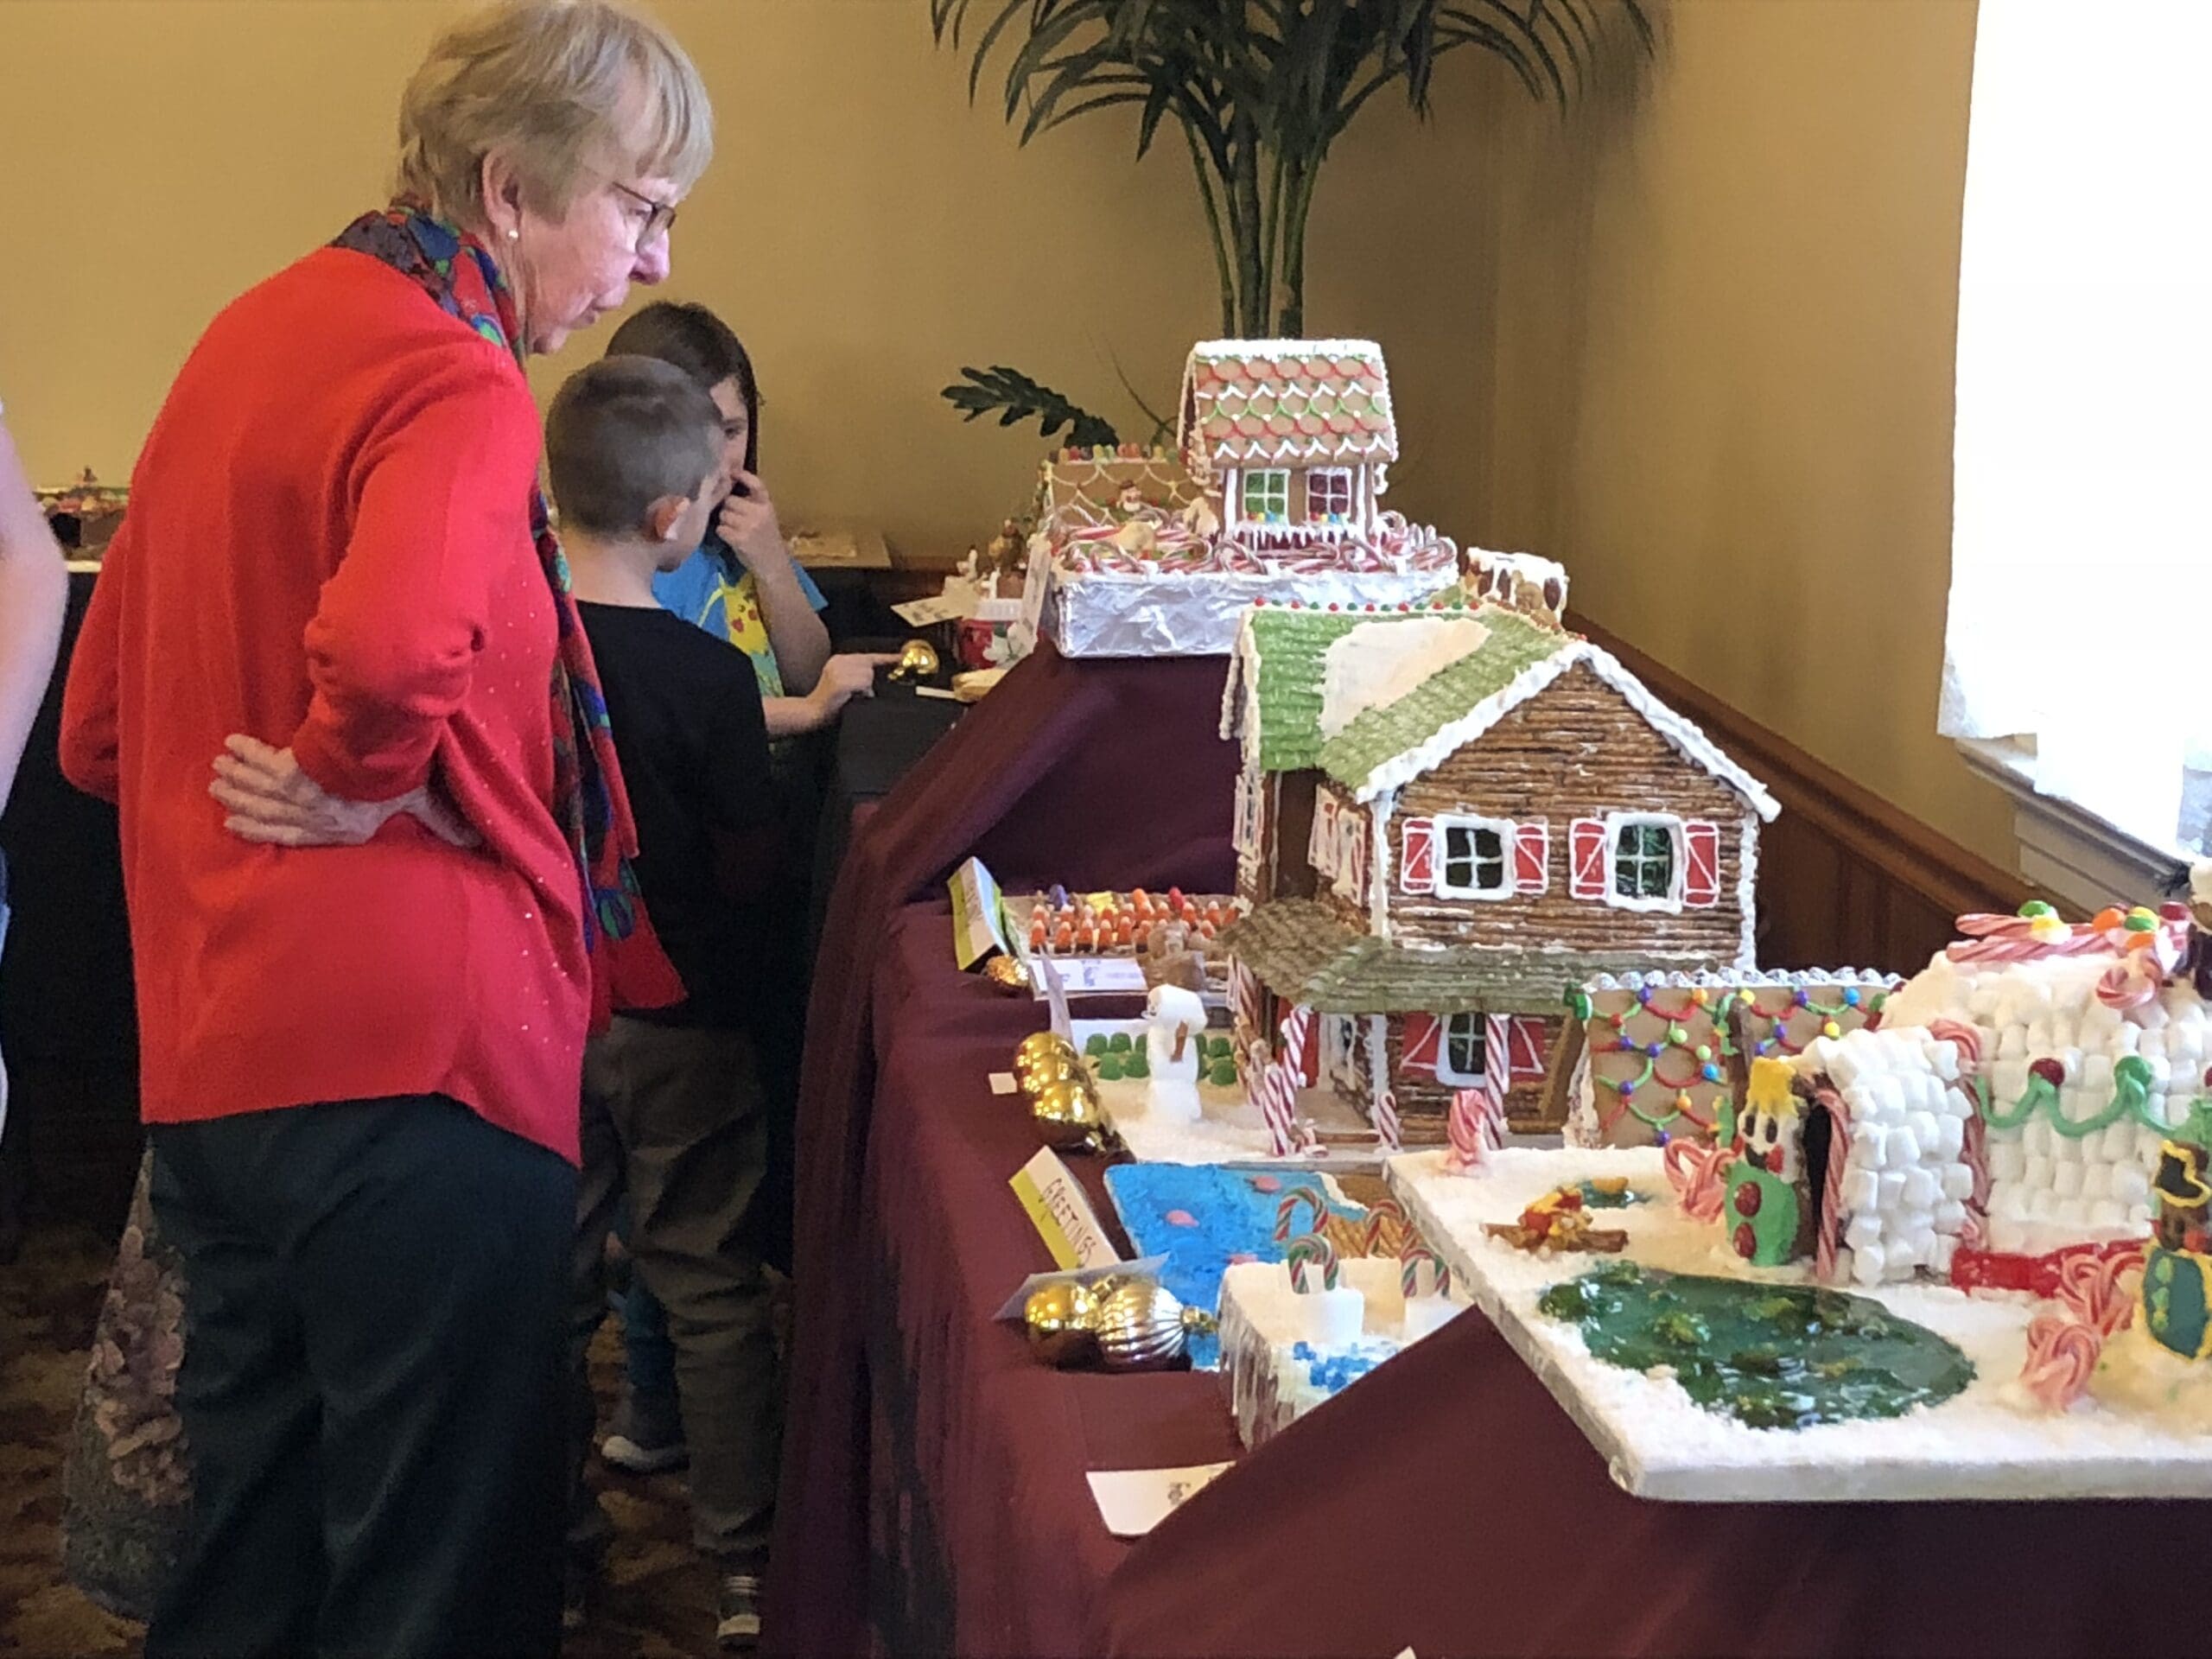 An older woman and a young boy examine gingerbread houses displayed on a table at an indoor event in Heritage Square, Oxnard.